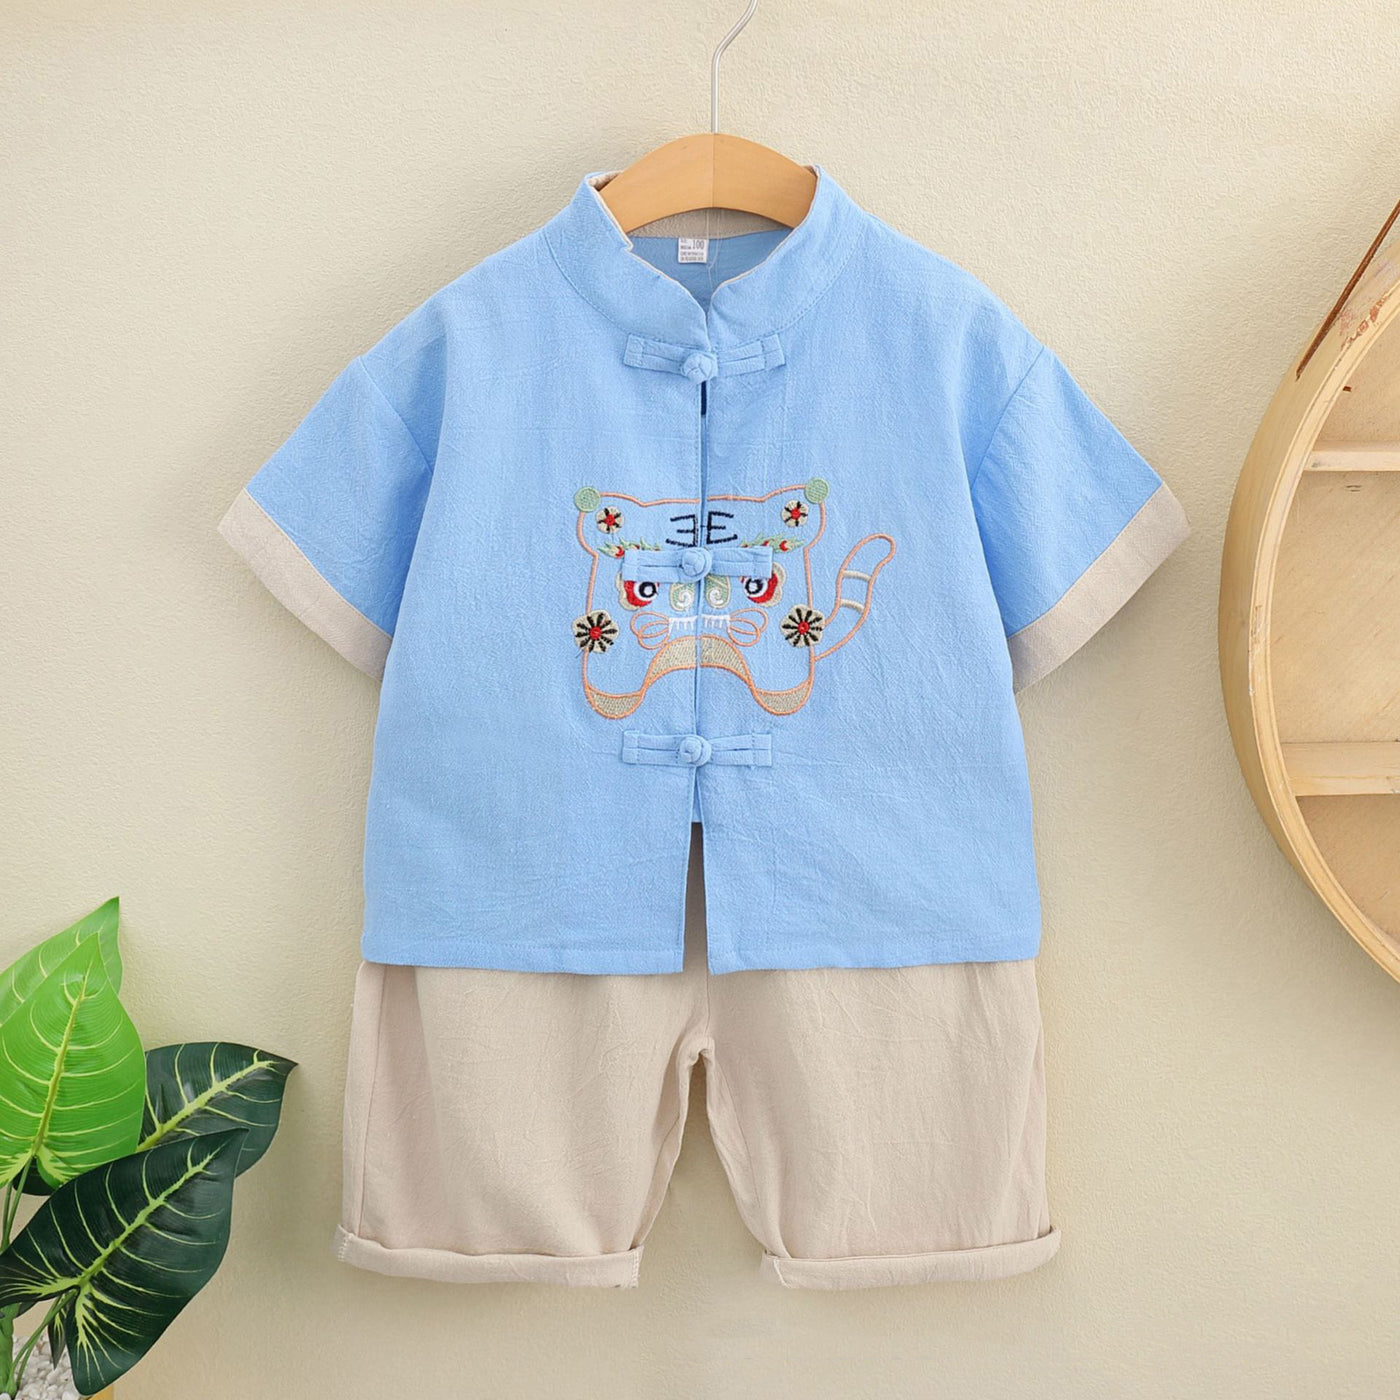 Kids Boys Cheongsam Set Top n Shorts Embroidered Tiger Racial Harmony Day CNY Chinese New Year Outfit - Little Kooma